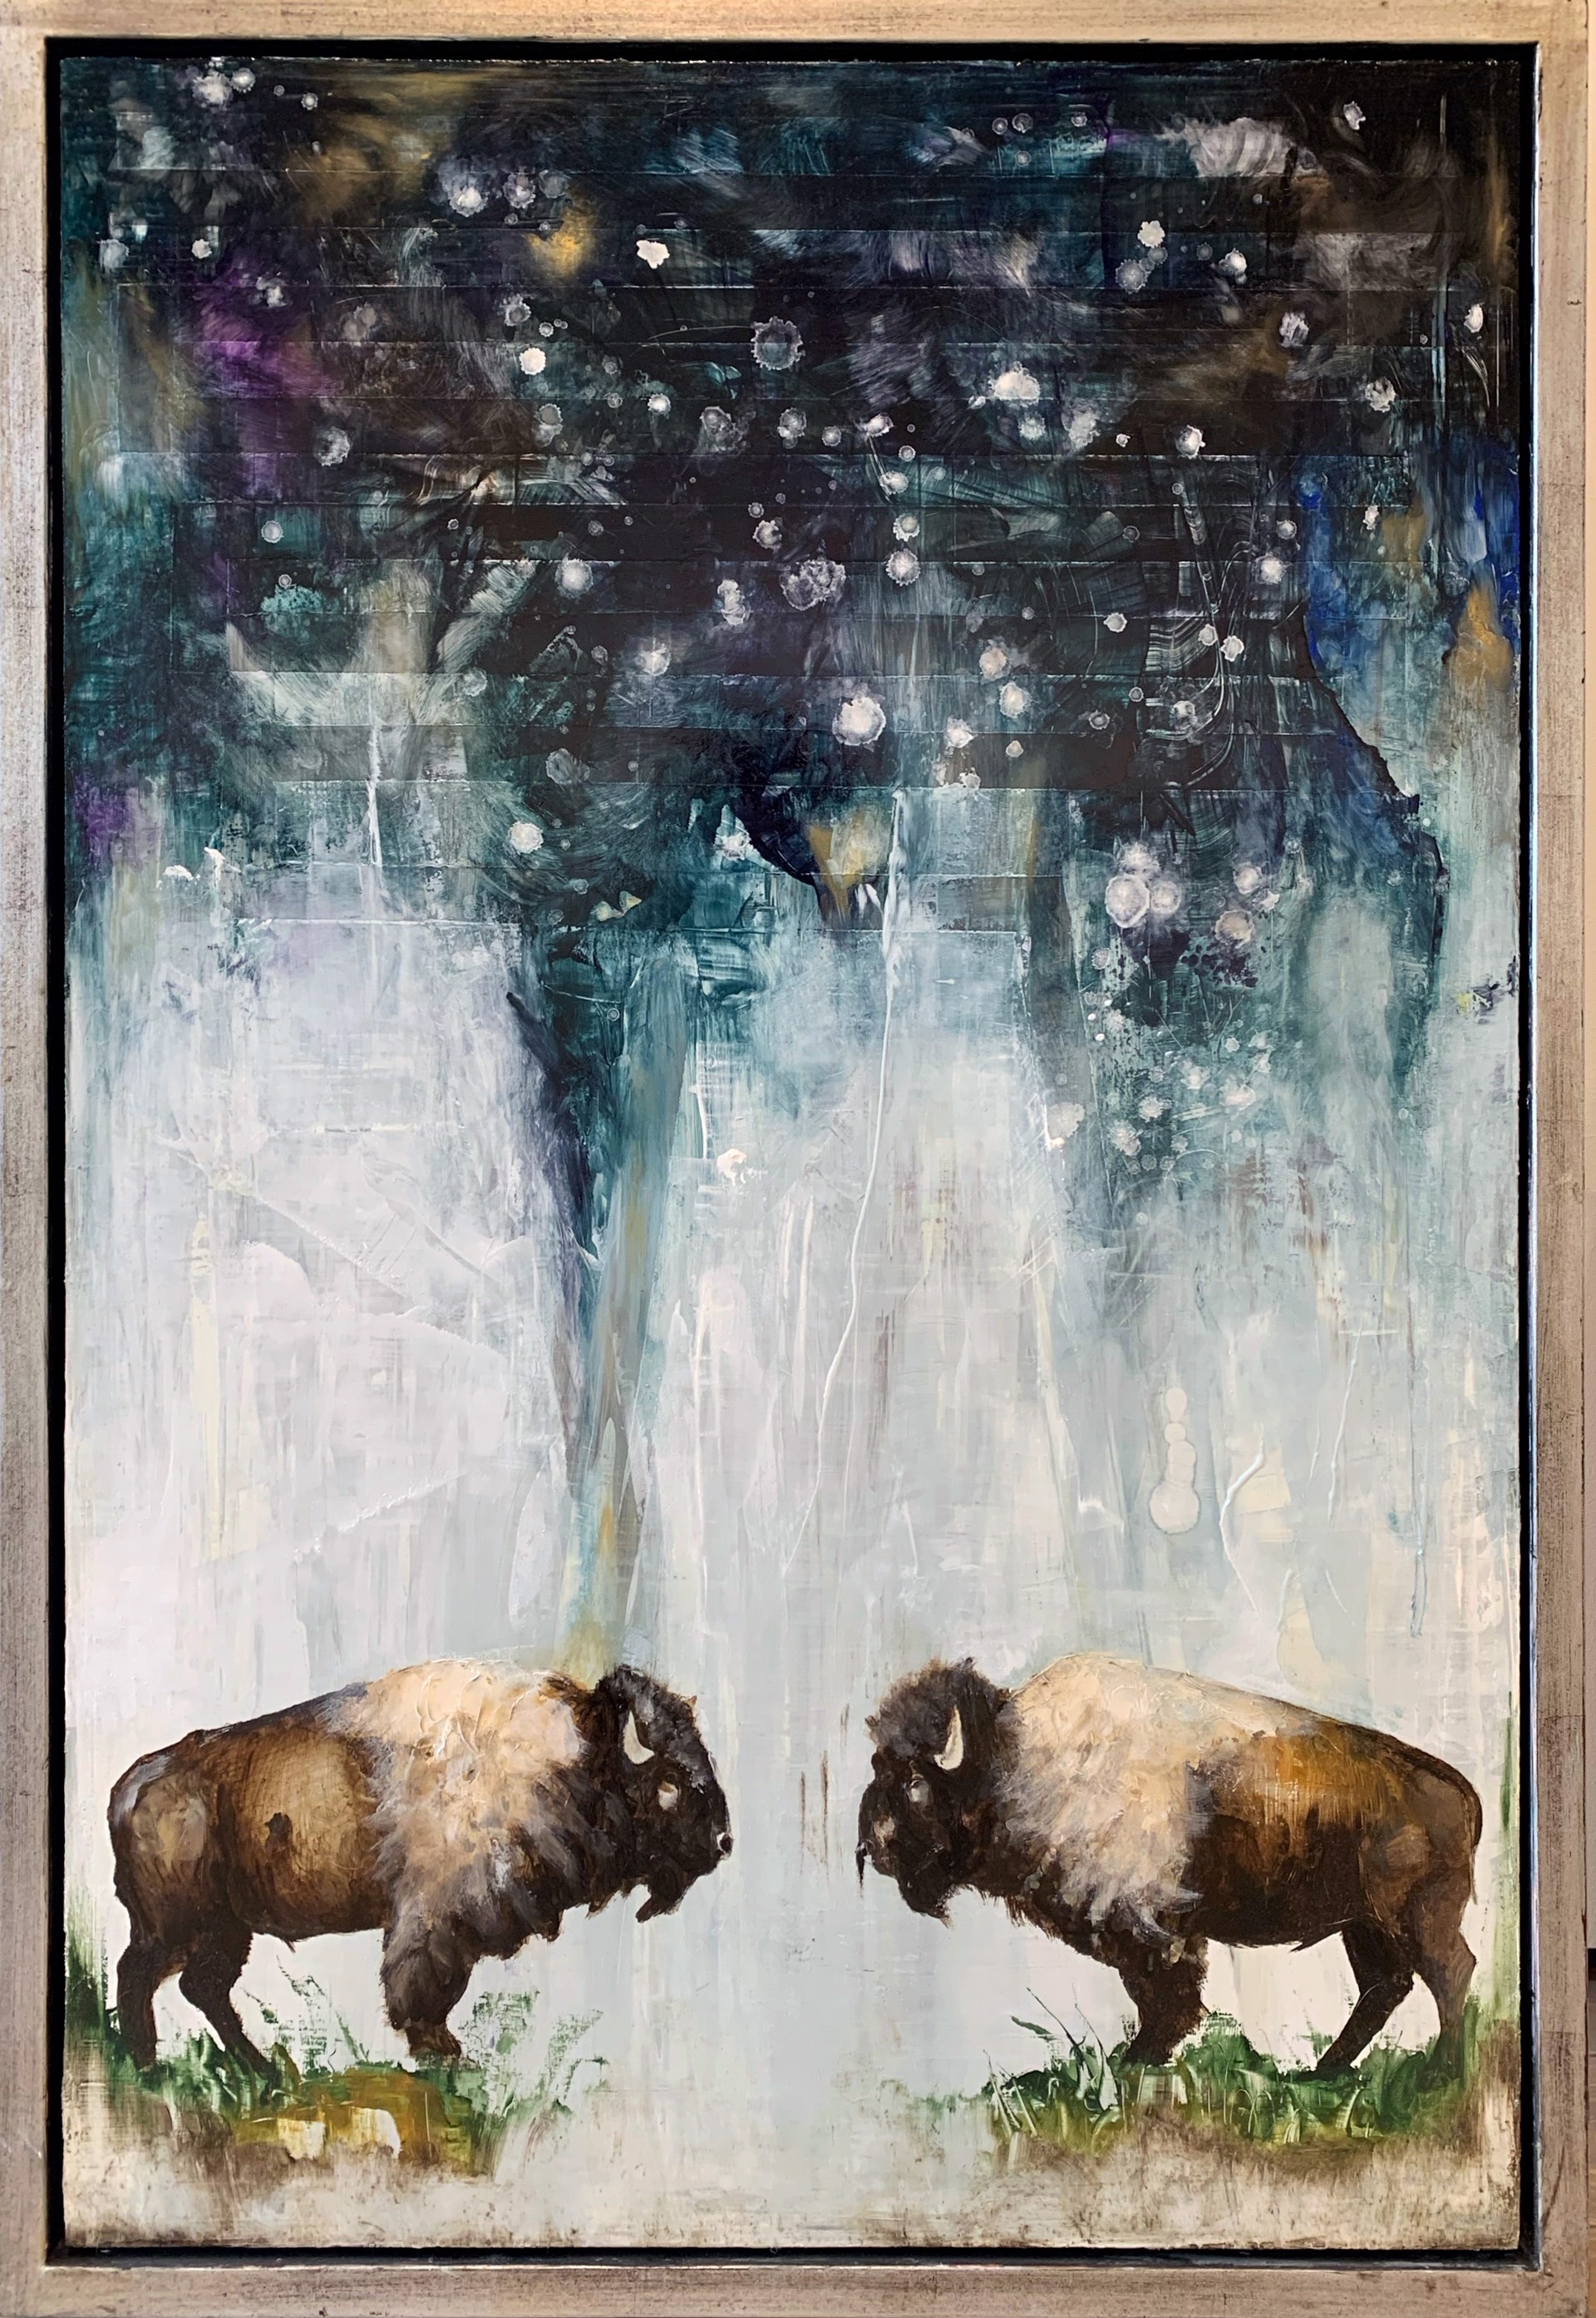 A Contemporary Painting Of Two Bison With An Abstract Background By Jenna Von Benedikt Available At Gallery Wild